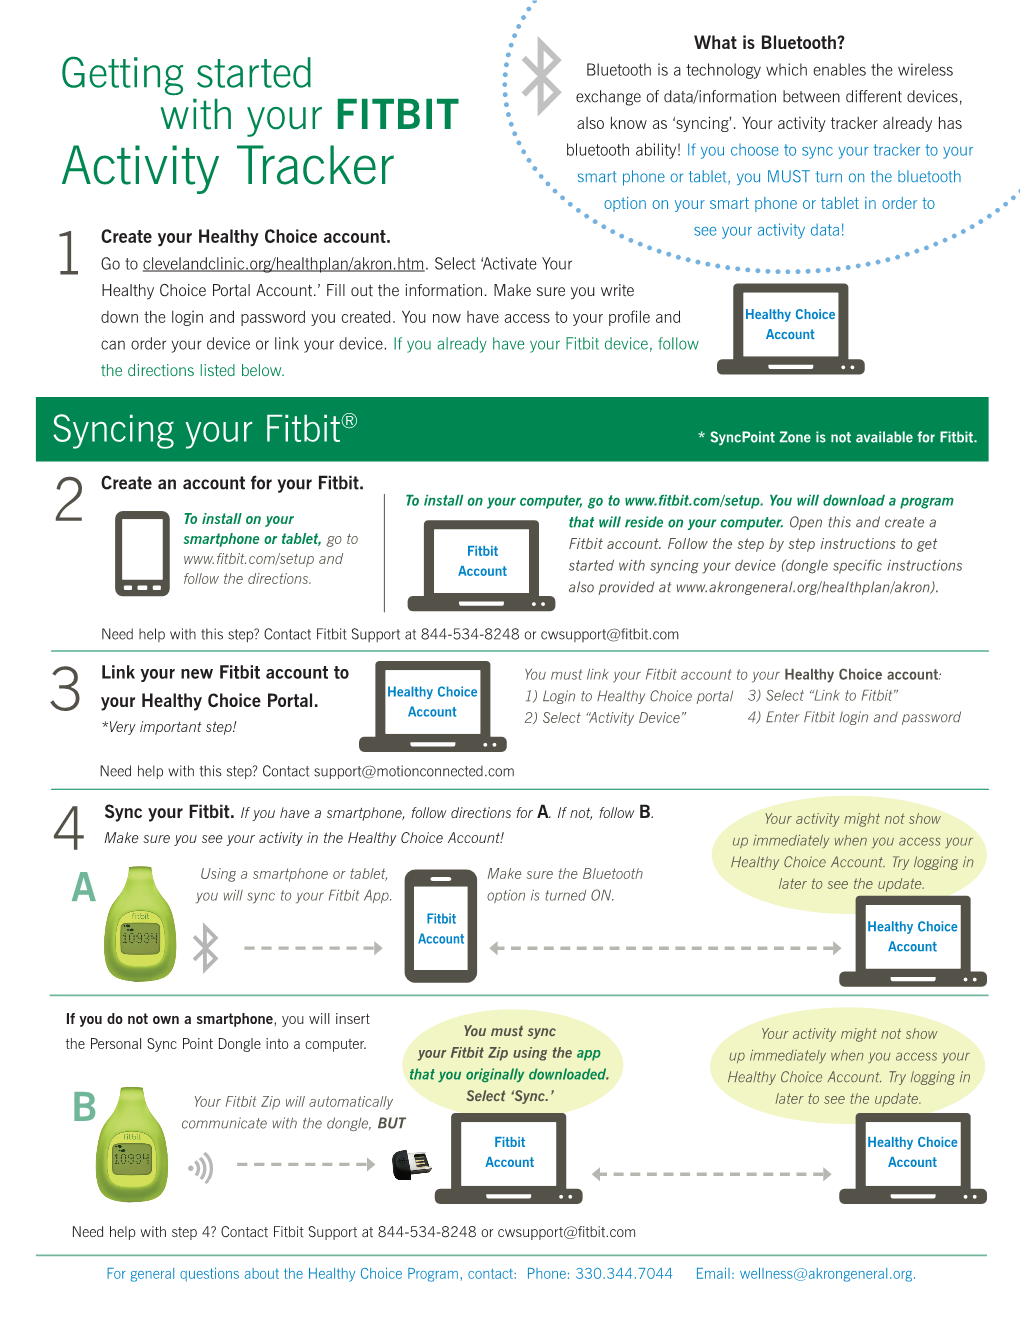 Getting Started with Your Activity Tracker